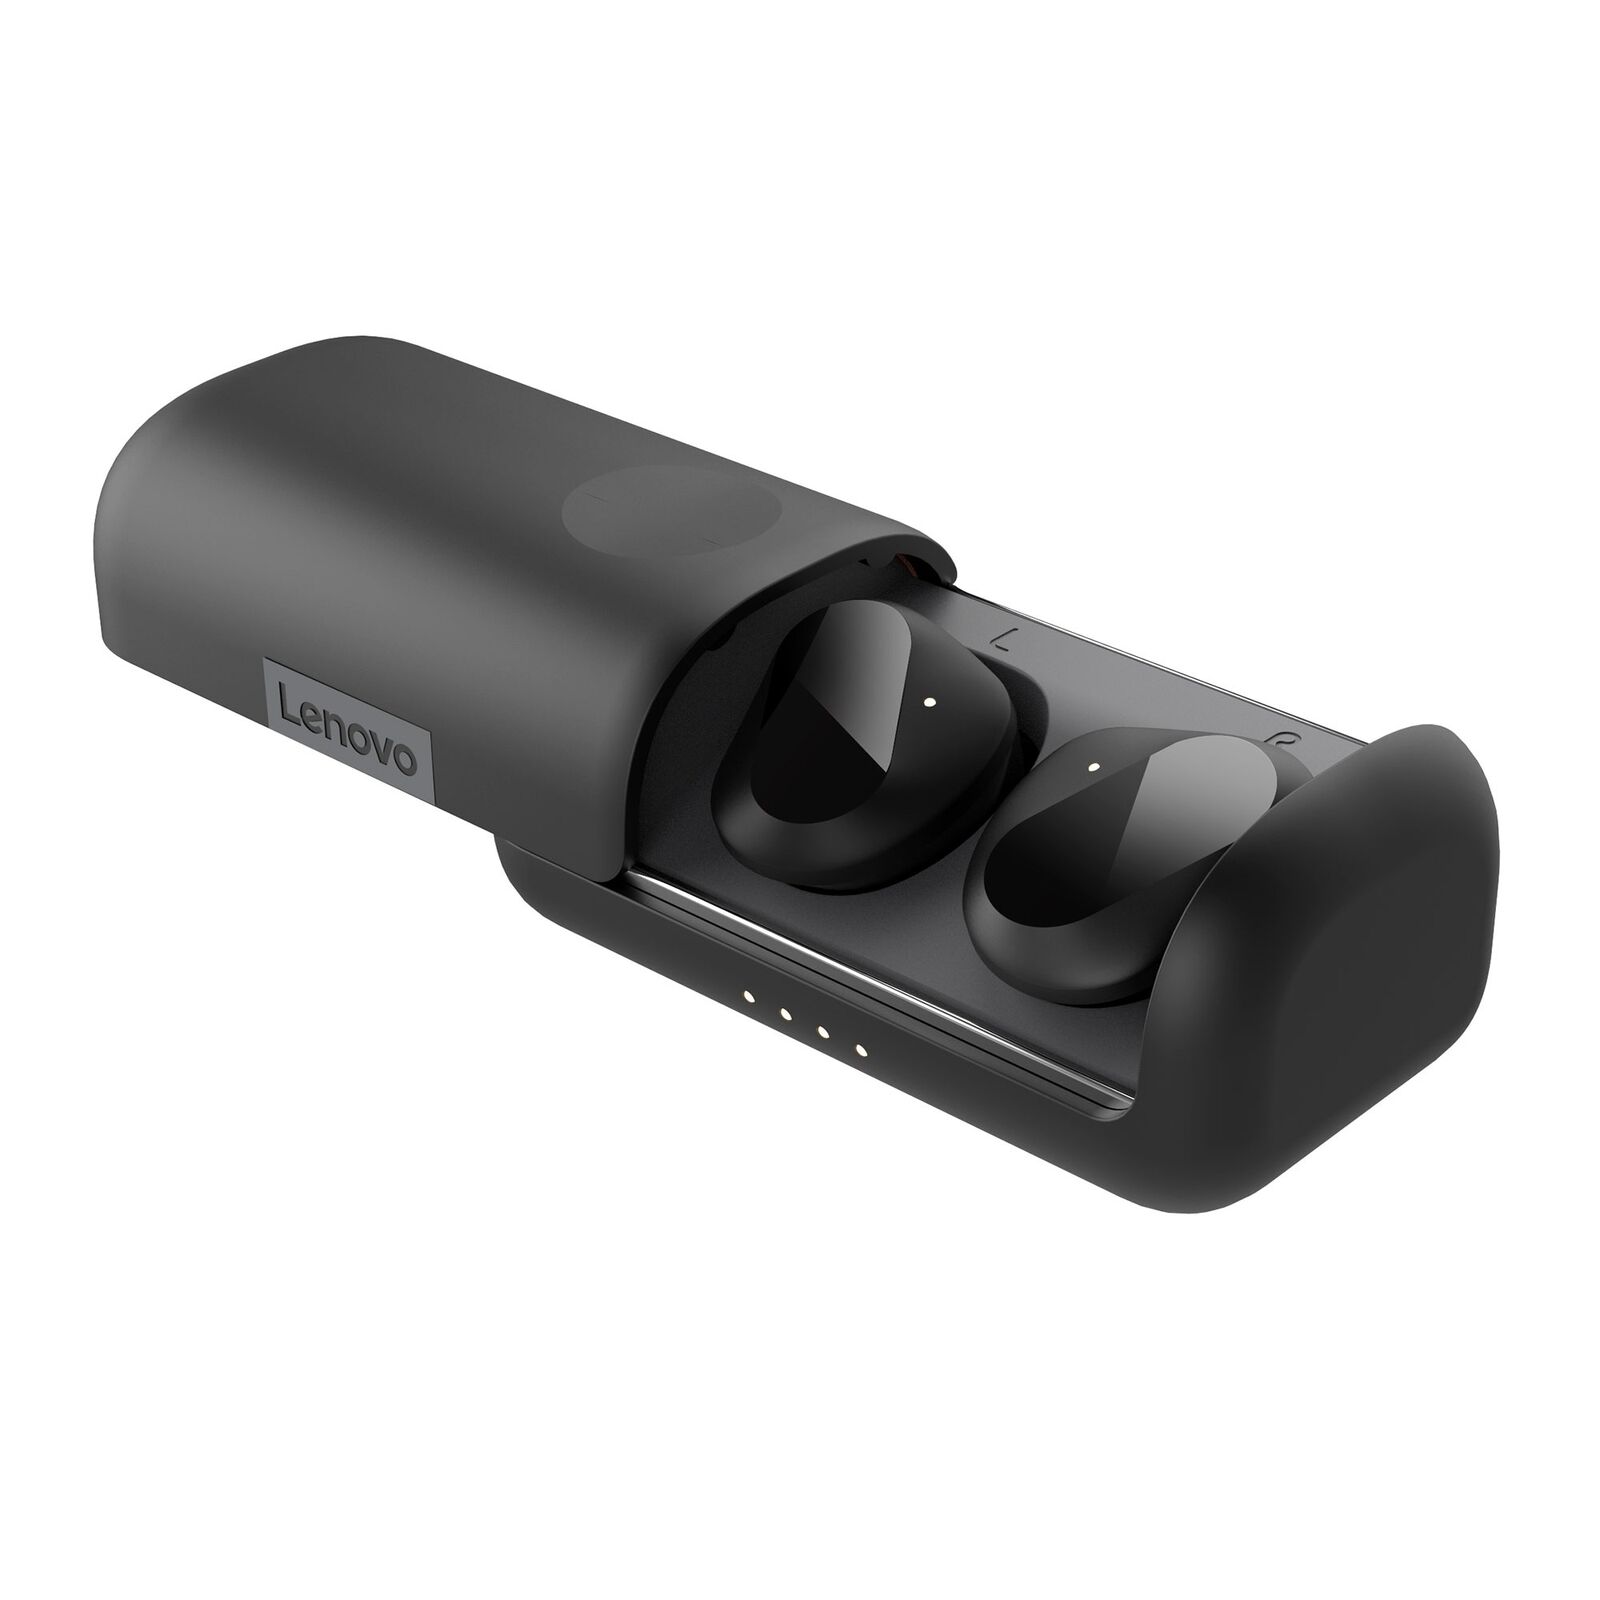 Lenovo True Wireless Bluetooth 5.0 Earbuds w/ Built-In Mic $15 + free shipping